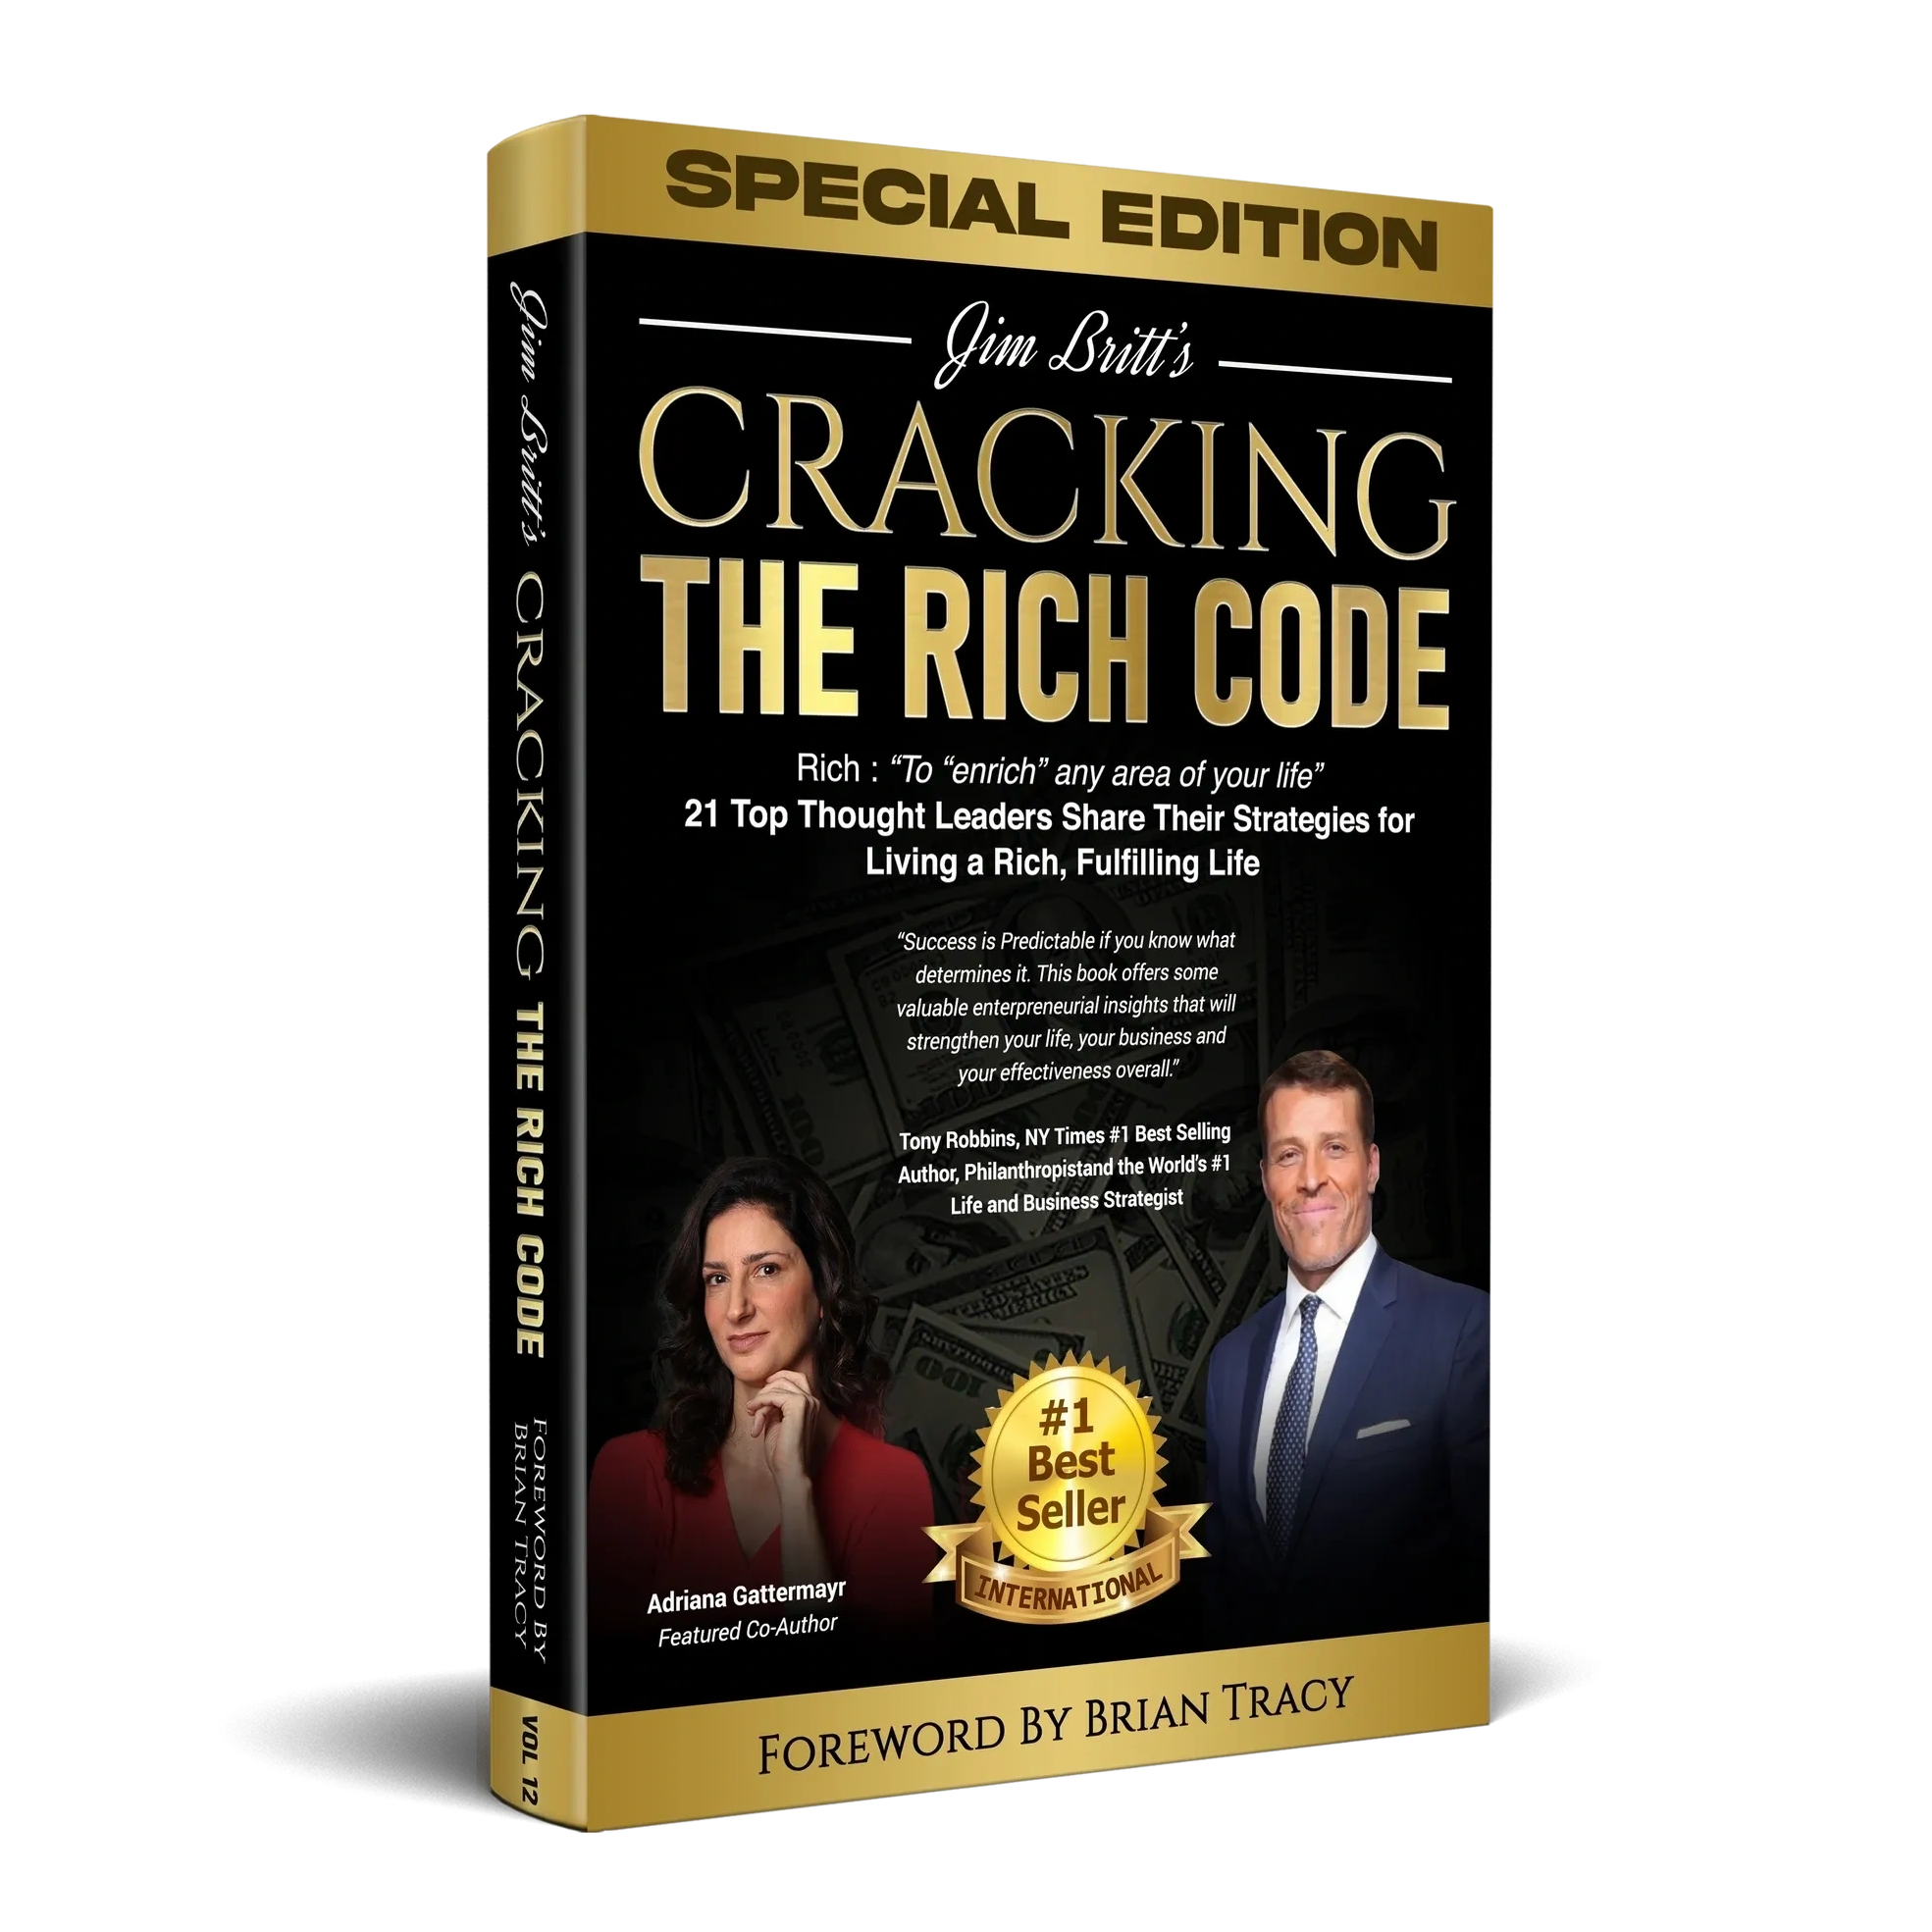 Cracking the rich code - book cover